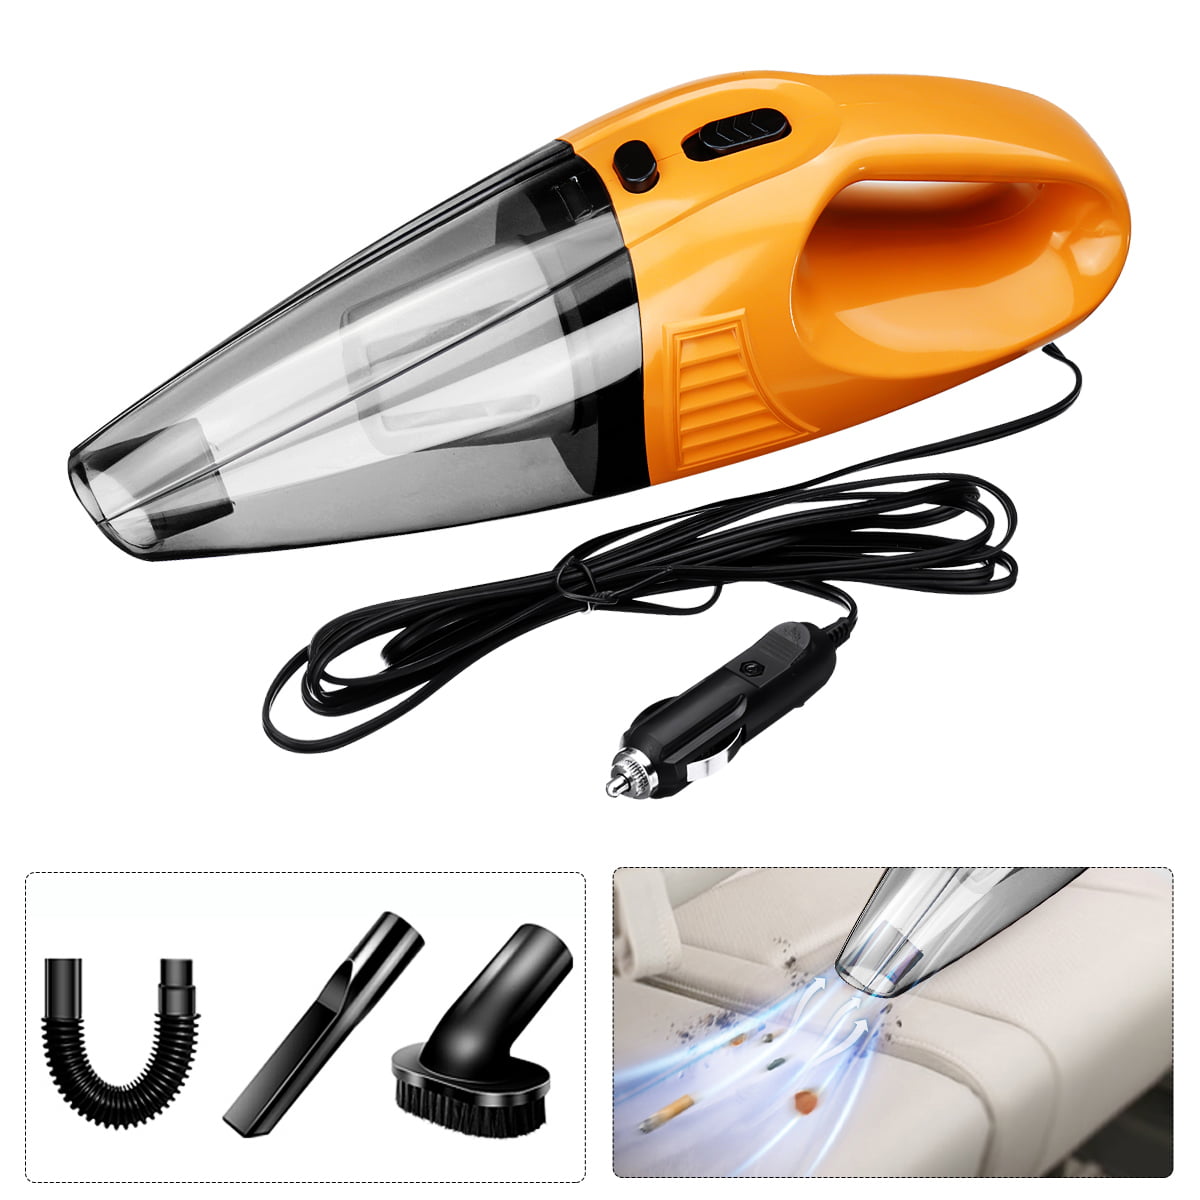 1x Rechargeable Portable Vacuum Cleaner Car Cleaning Supplies White